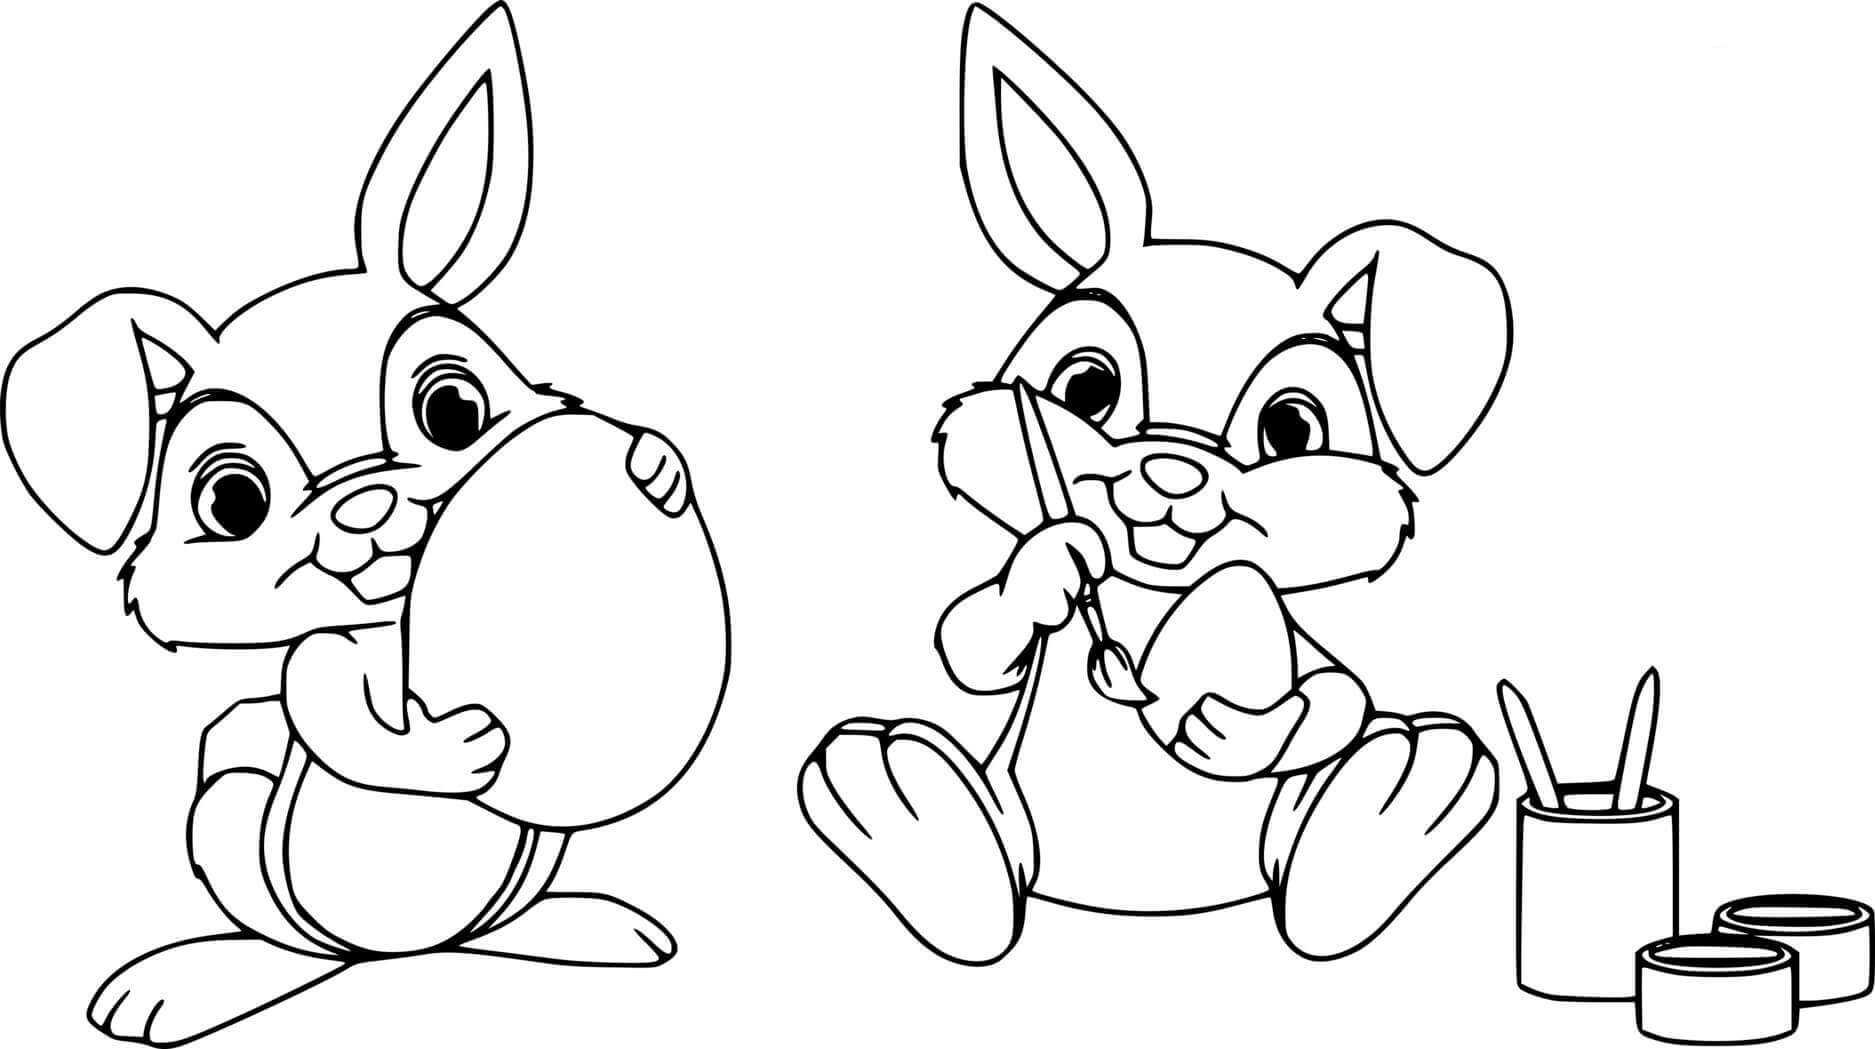 Two Bunnies Drawing Easter Eggs